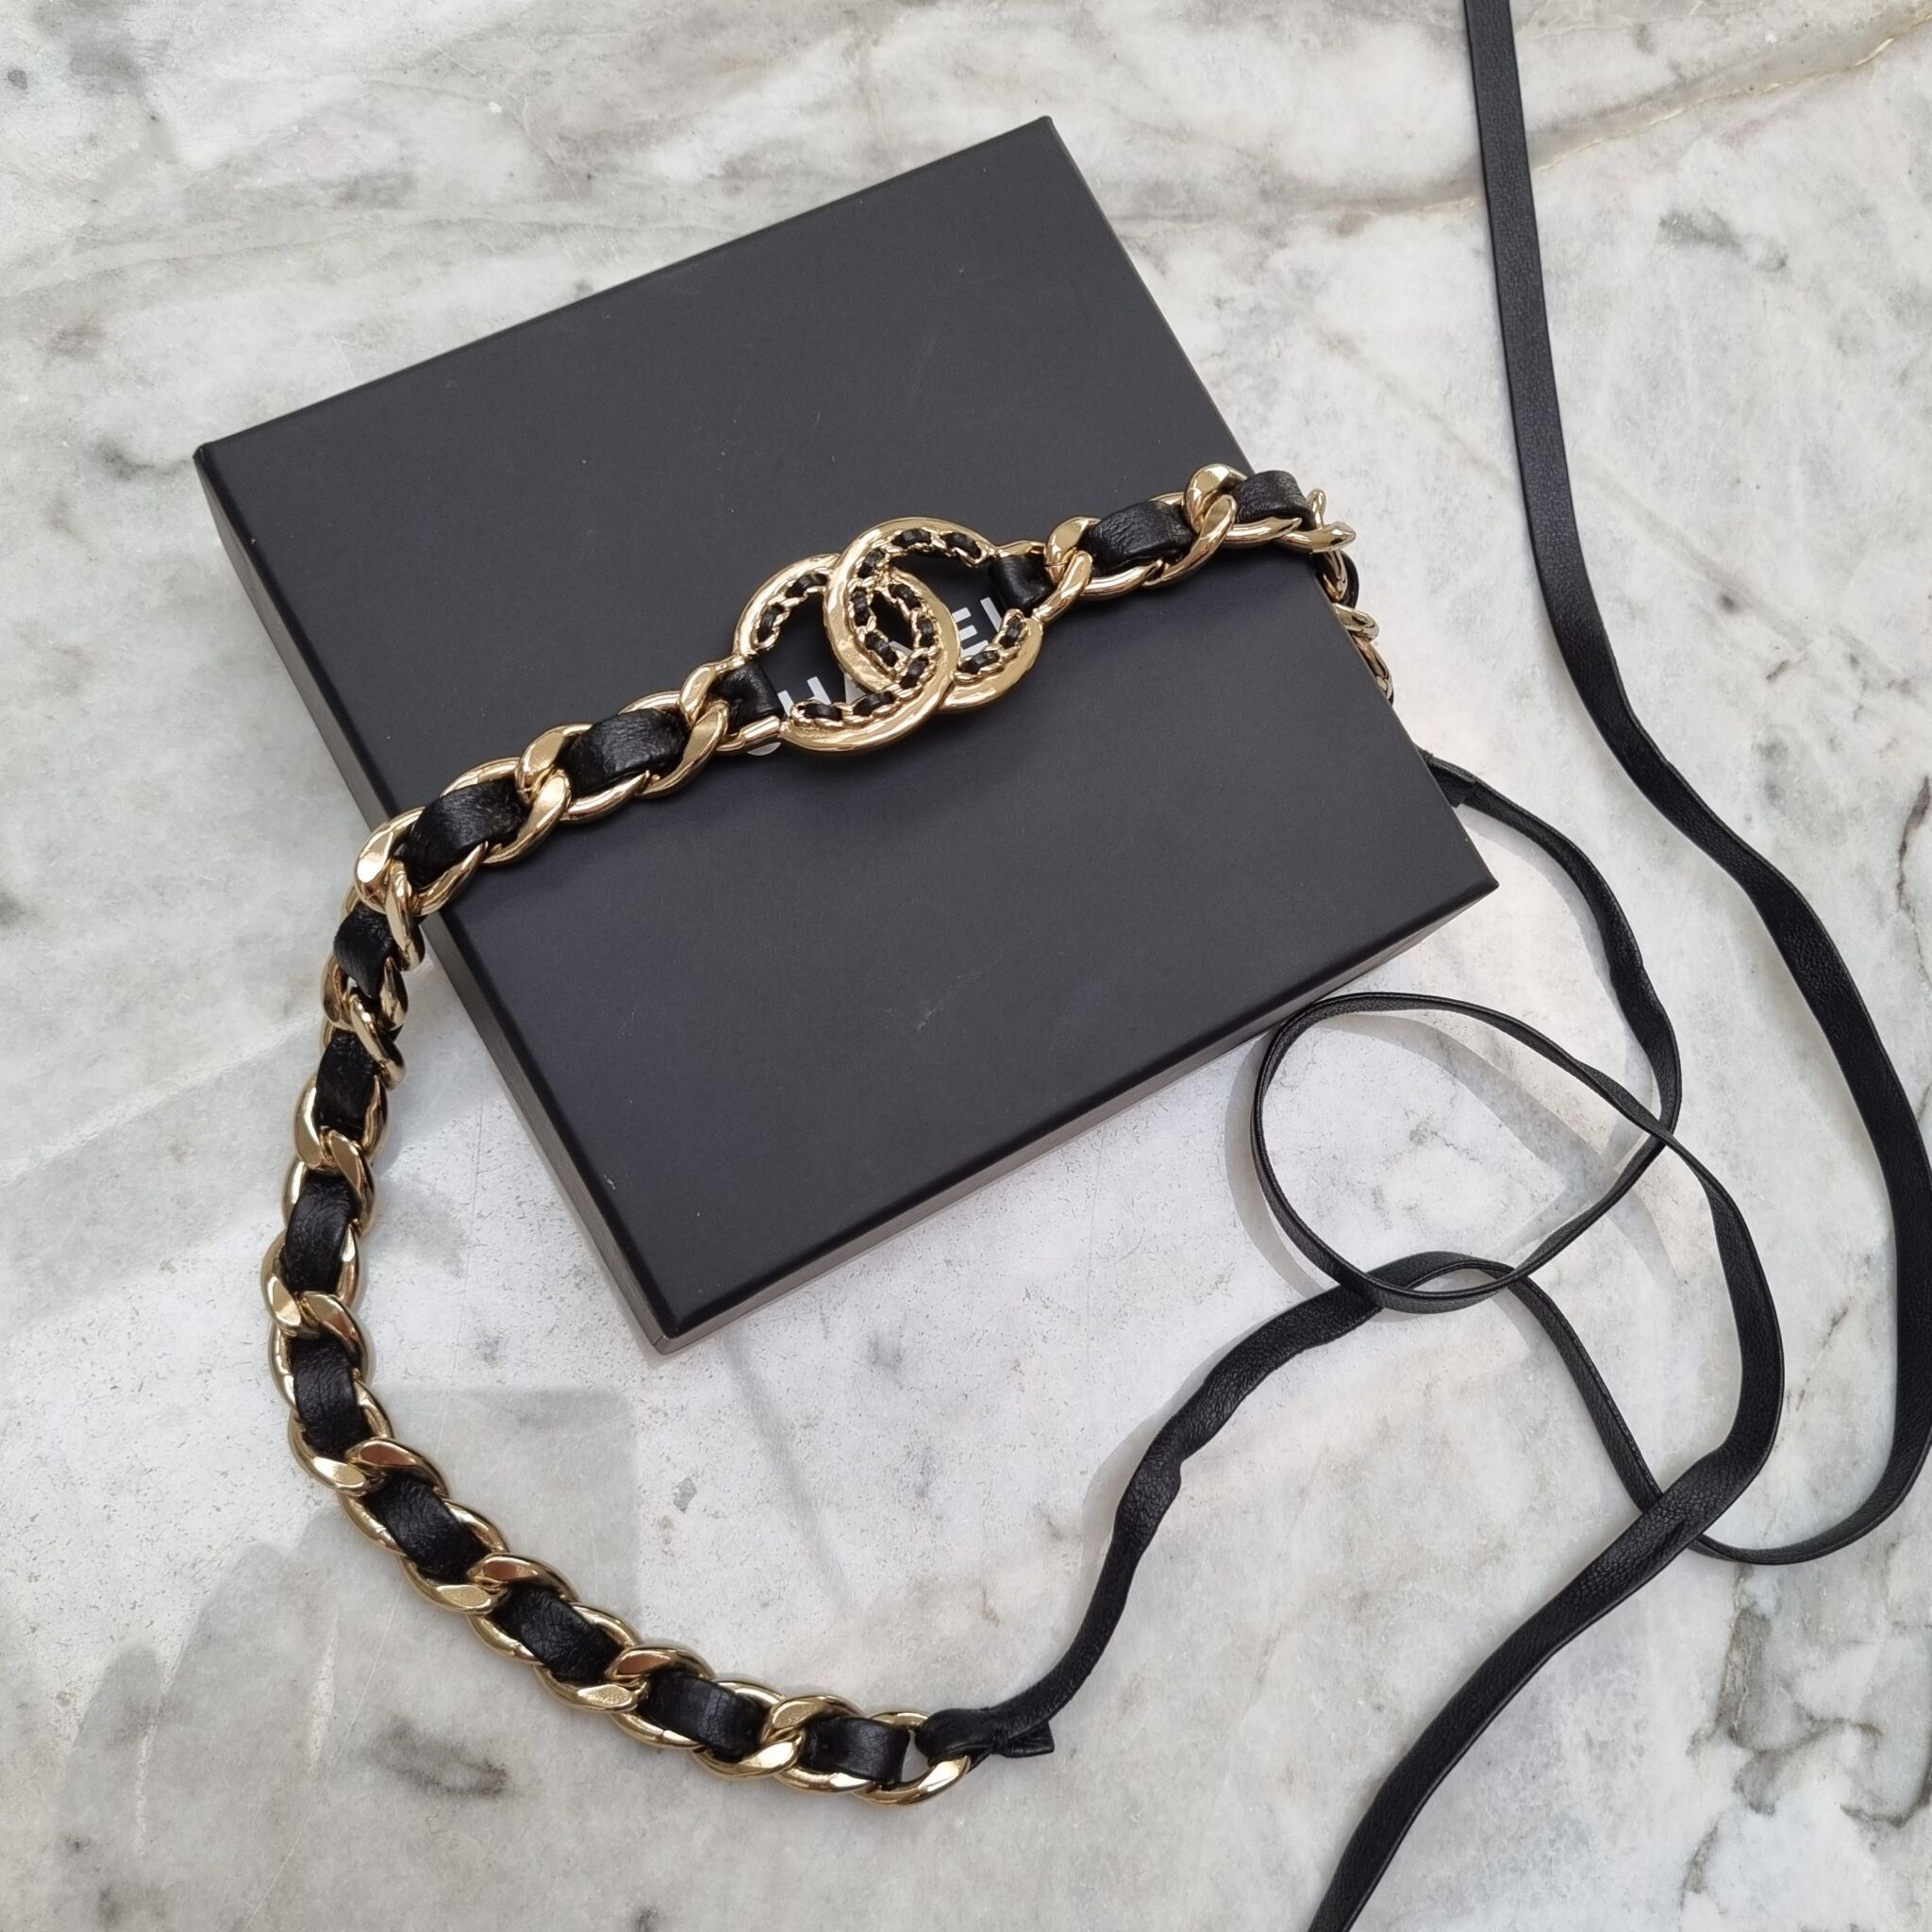 Narrow leather & small gold chain hairband LUCCIA - Luxury jewelry